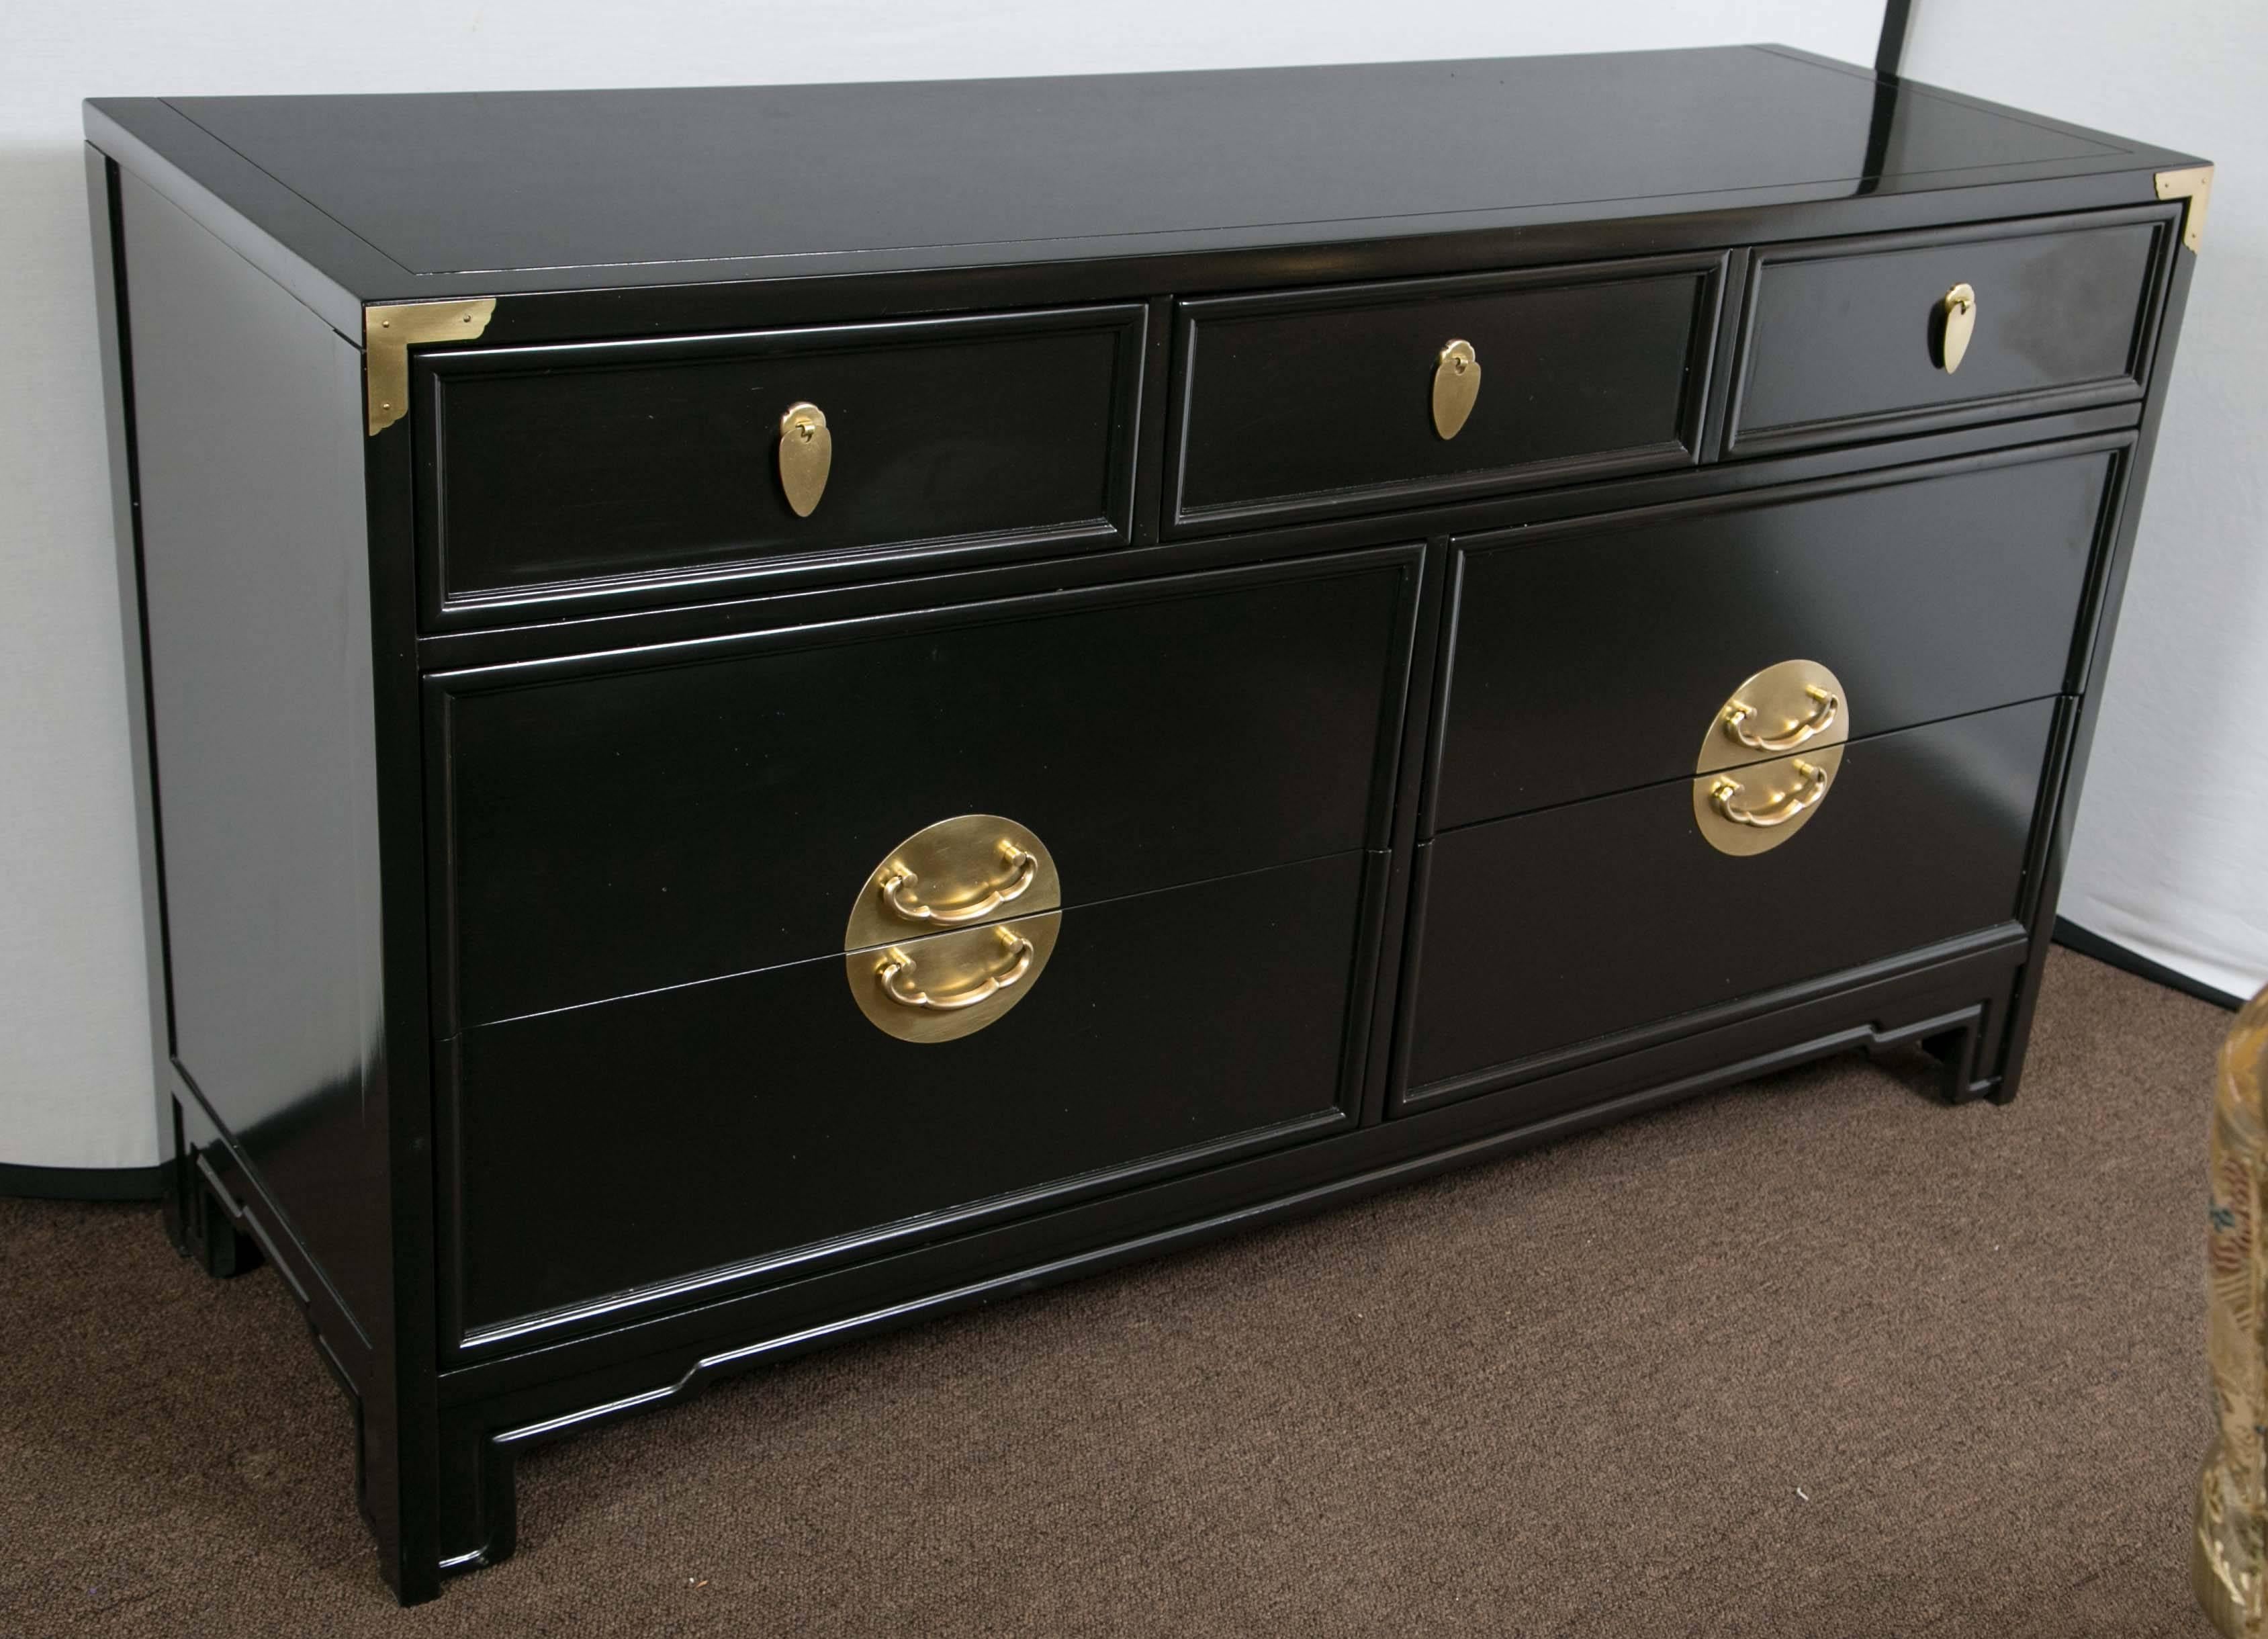 A pair of Kent Coffey Asian style black lacquer cabinets two over four drawers with brass hardware each signed as photographed. Each case in a fine Steinway Piano hi gloss finish. The pair of commodes have polished brass handles and hardware to add